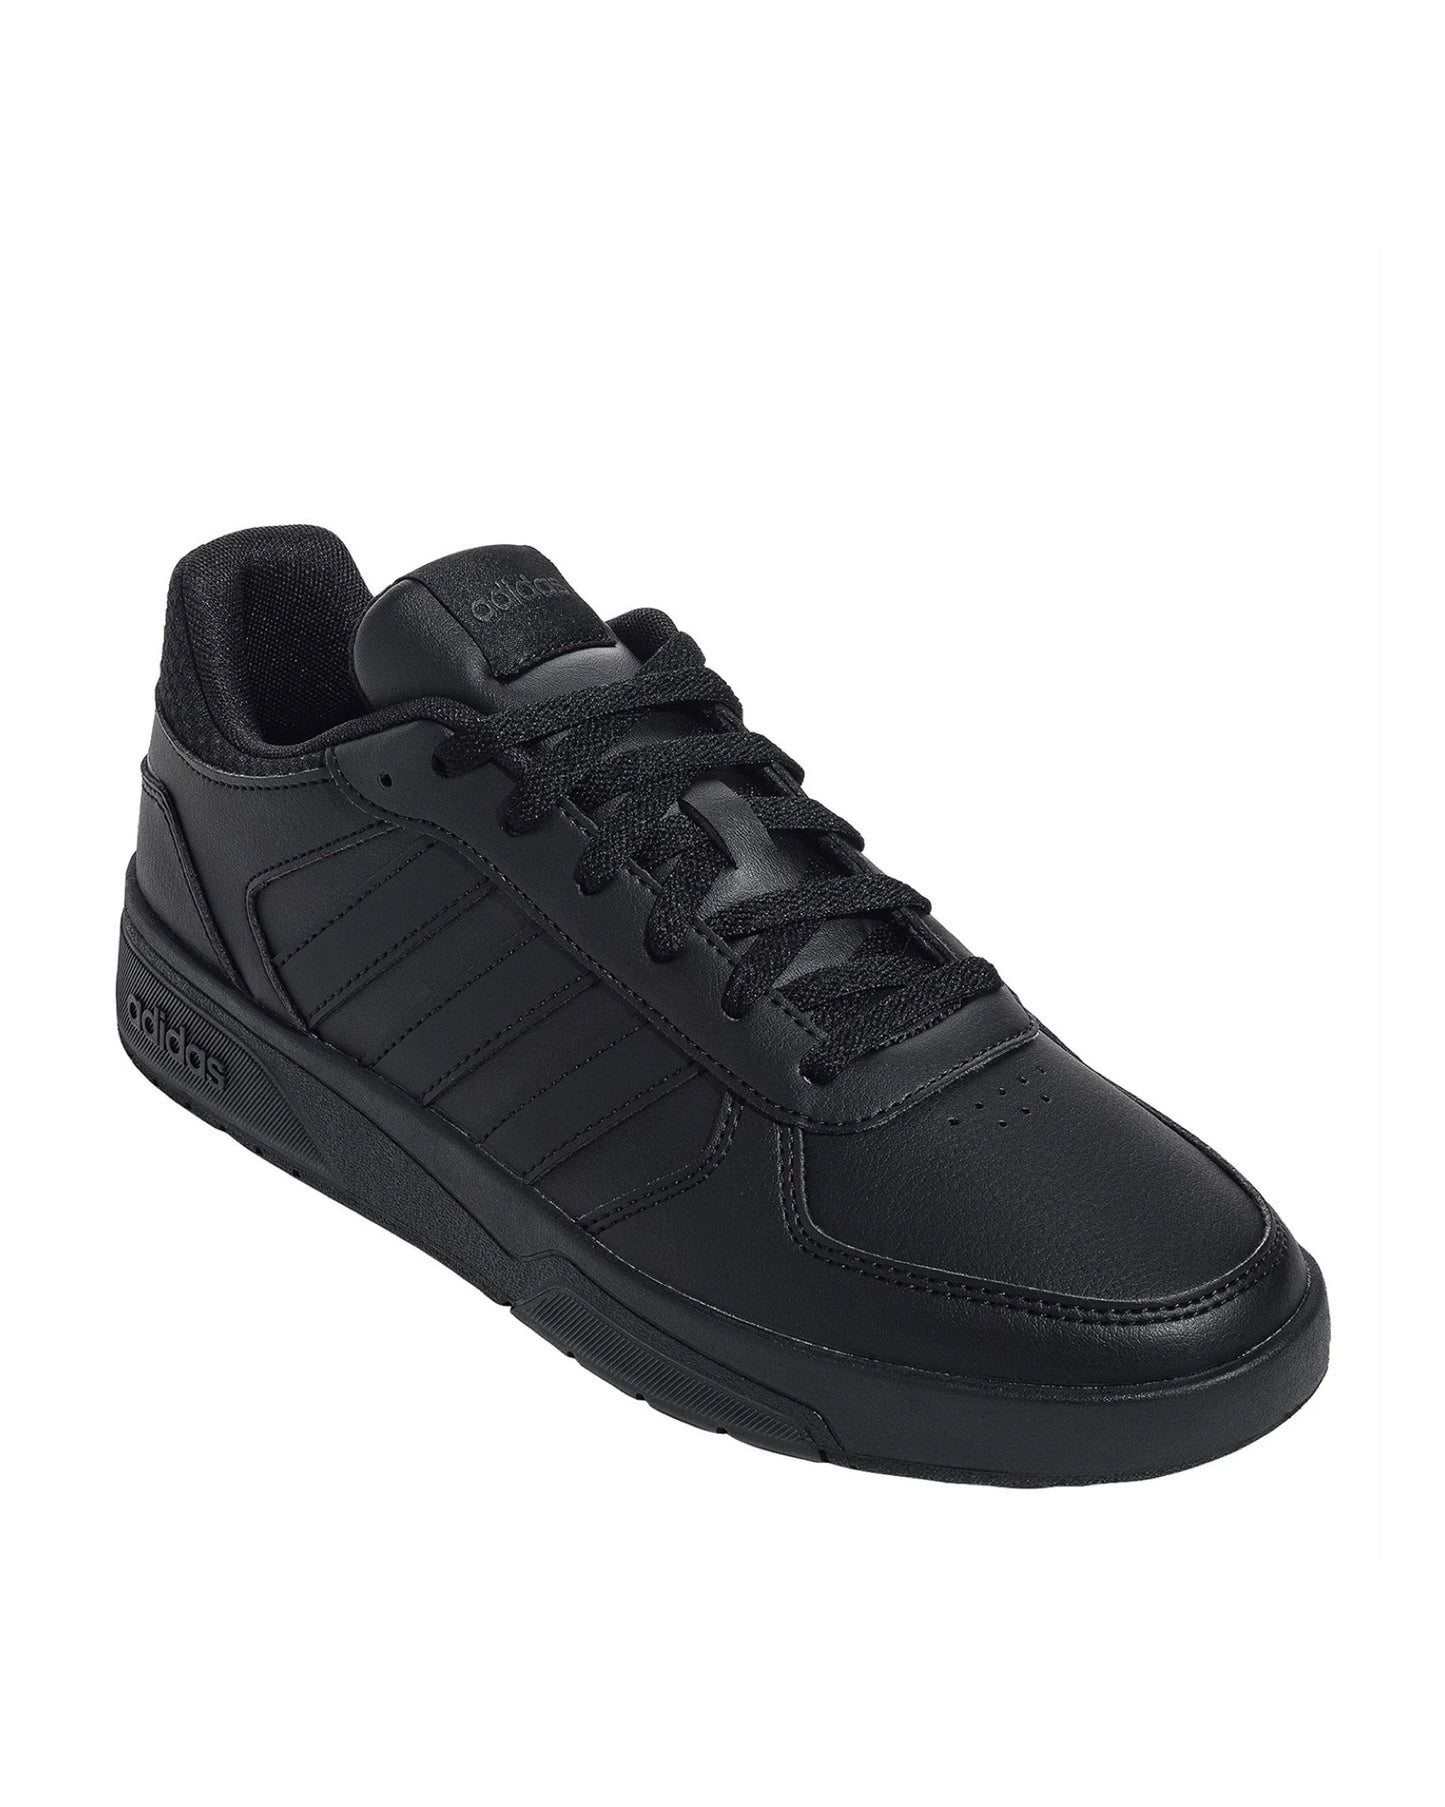 Adidas CourtBeat trainers Sn99 in black